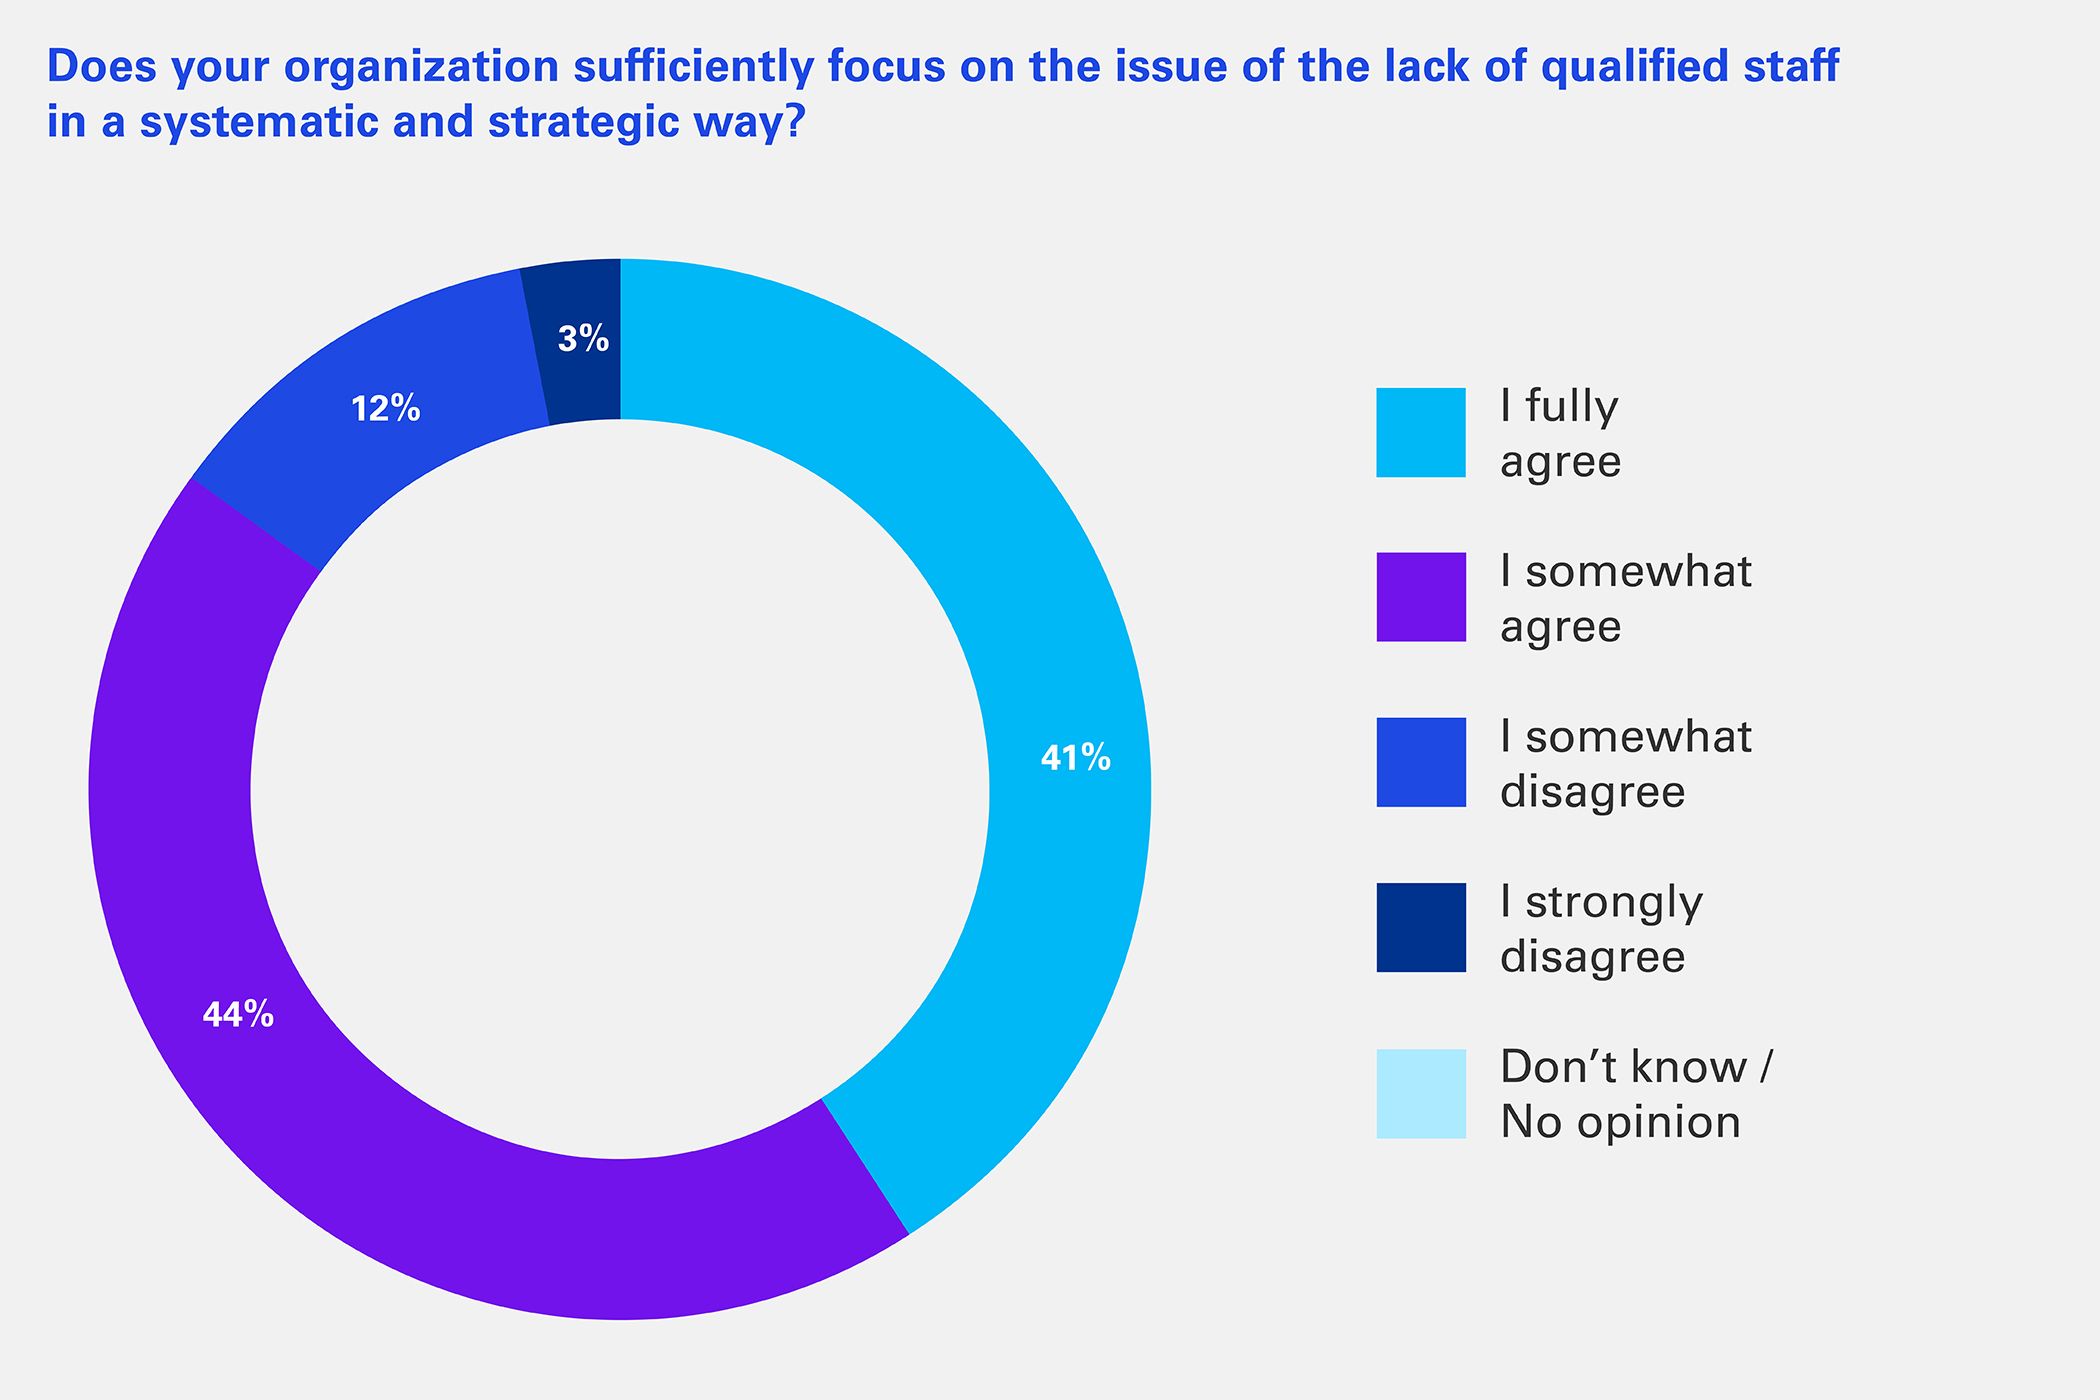 Piechart "Does your organization sufficiently focus on the issue of the lack of qualified staff in a systematic and strategic way?"